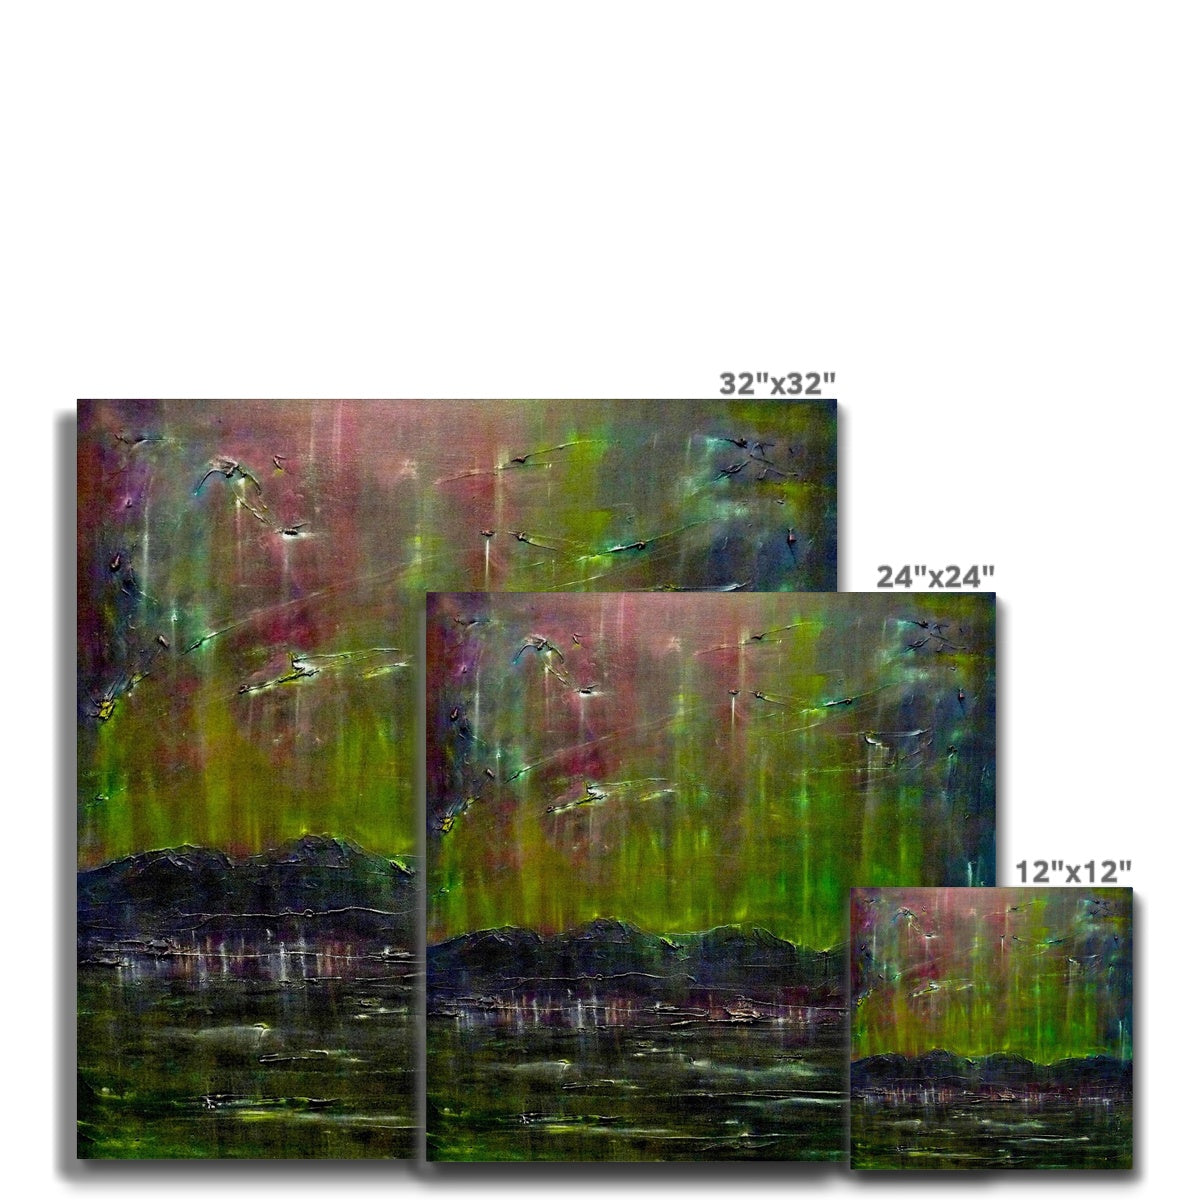 Cromarty Harbour Northern Lights Painting | Canvas From Scotland-Contemporary Stretched Canvas Prints-Scottish Highlands & Lowlands Art Gallery-Paintings, Prints, Homeware, Art Gifts From Scotland By Scottish Artist Kevin Hunter